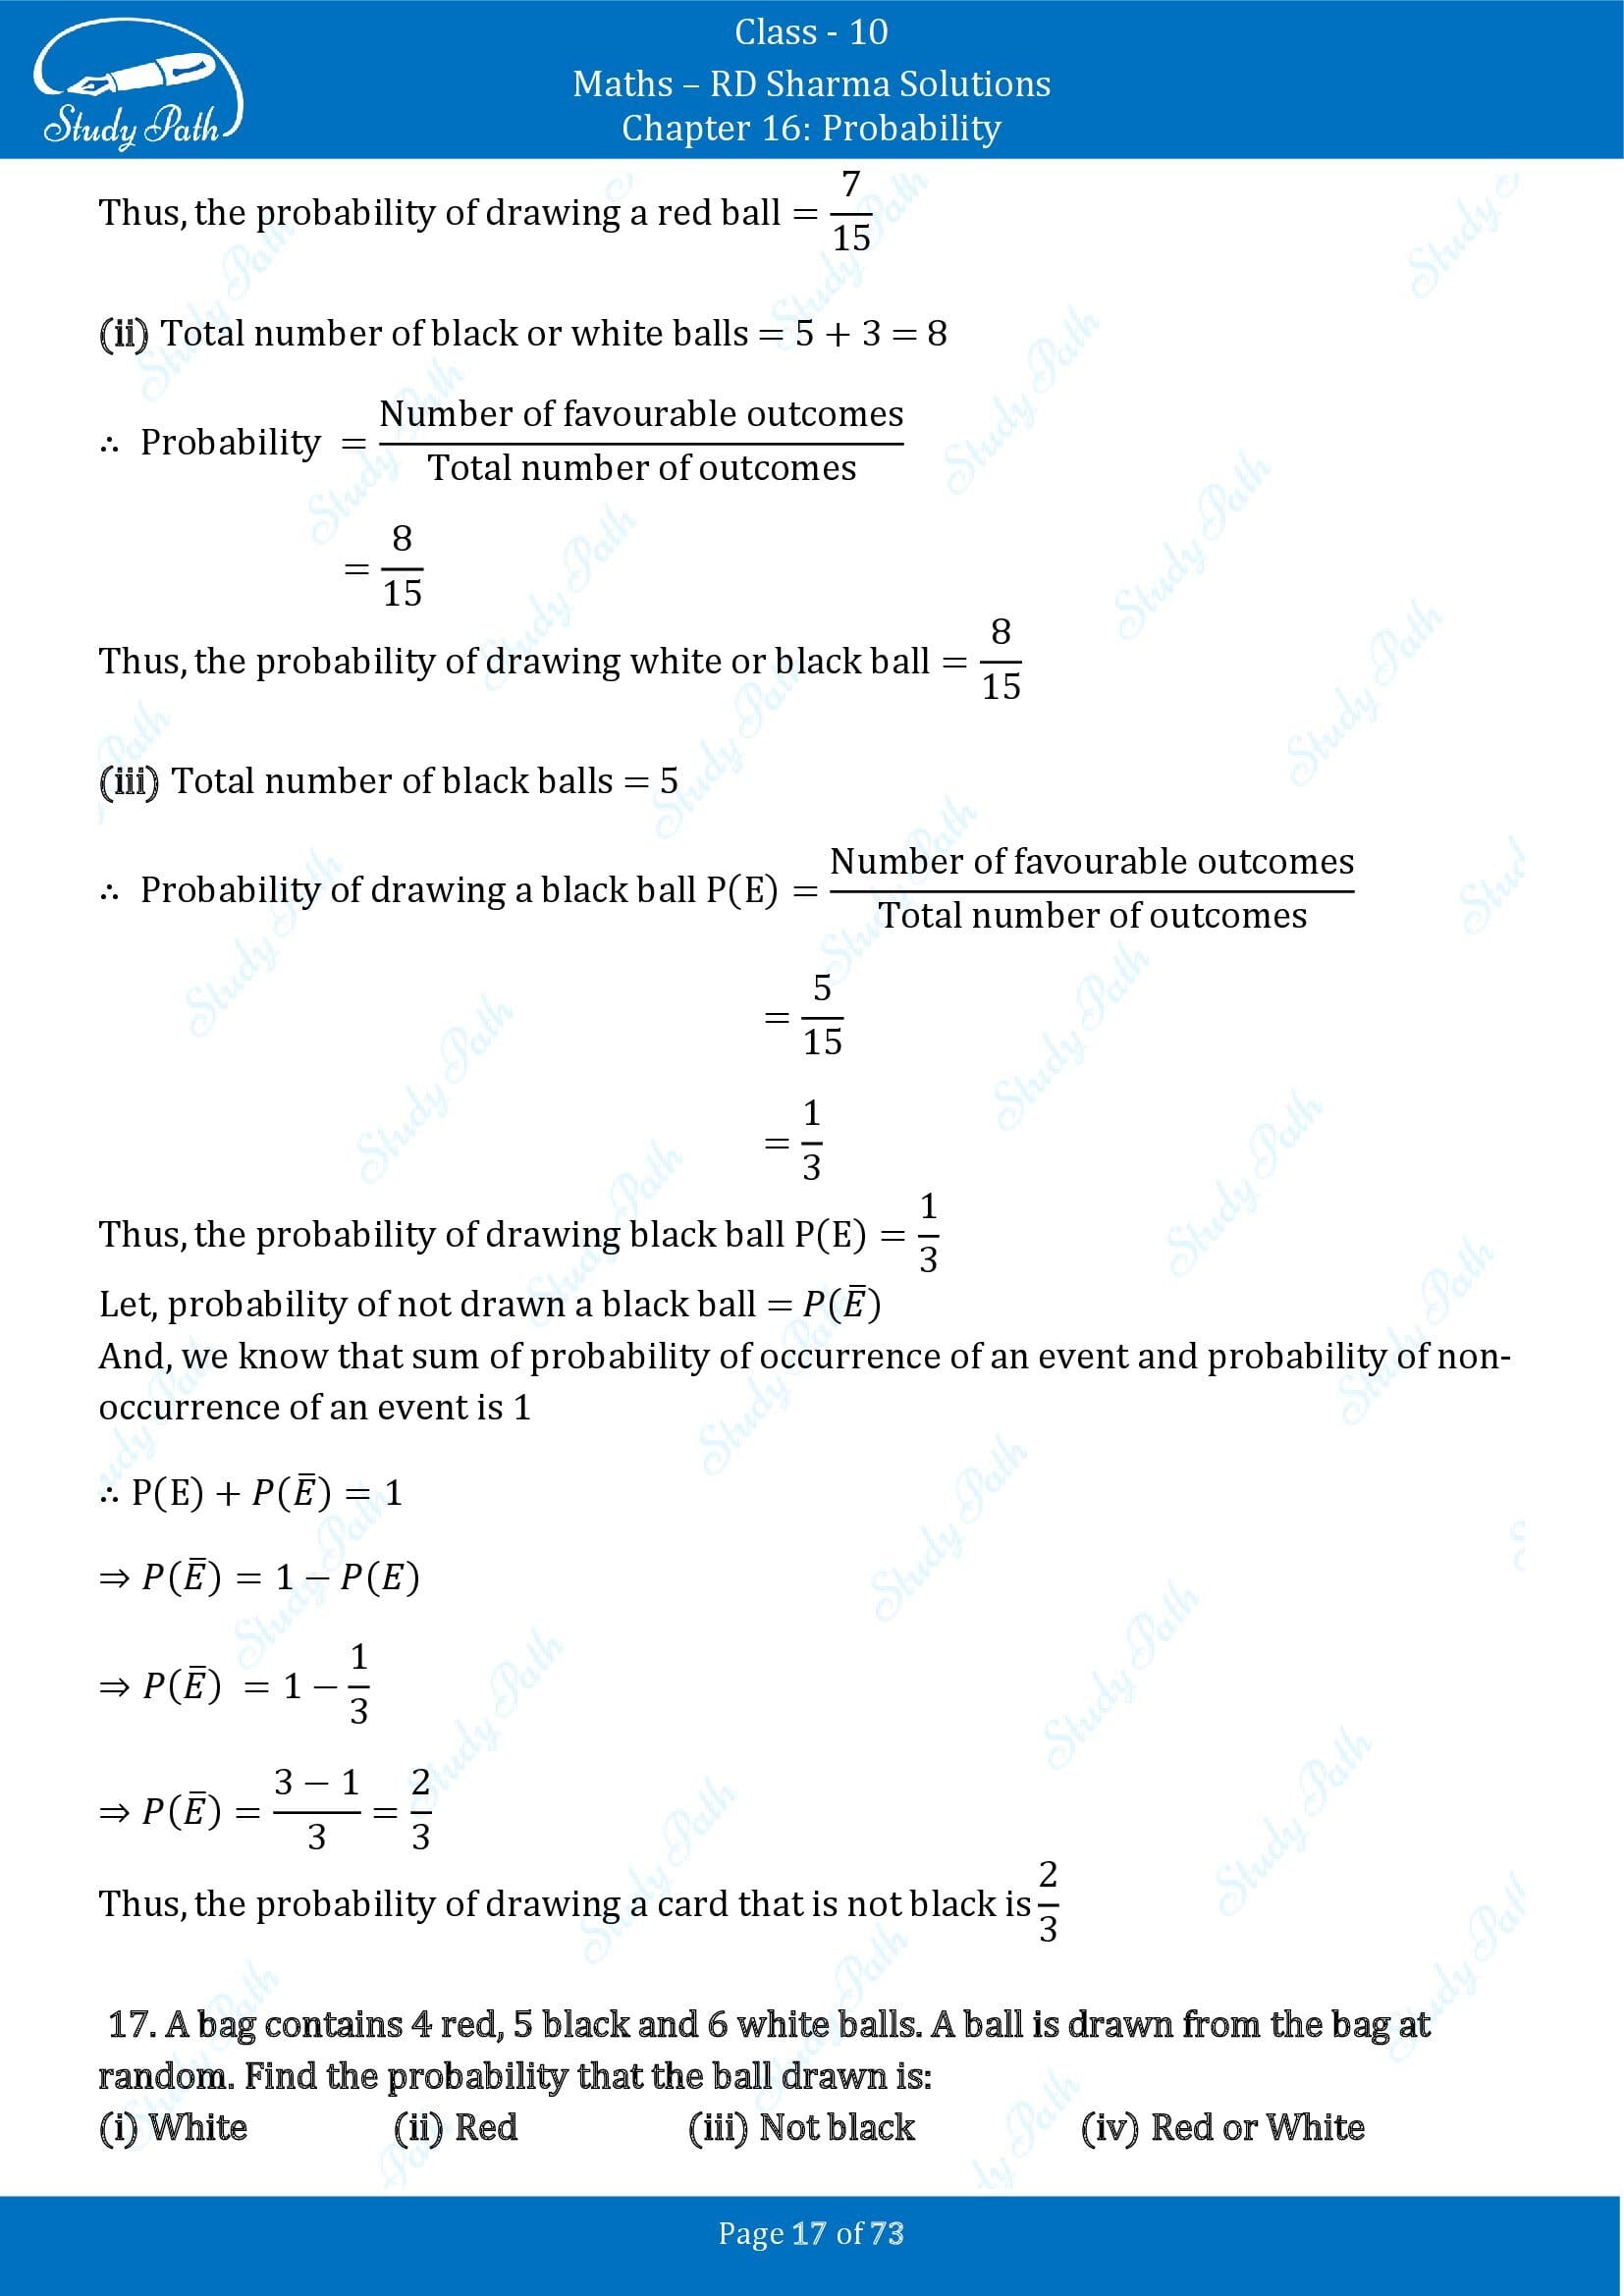 RD Sharma Solutions Class 10 Chapter 16 Probability Exercise 16.1 00017